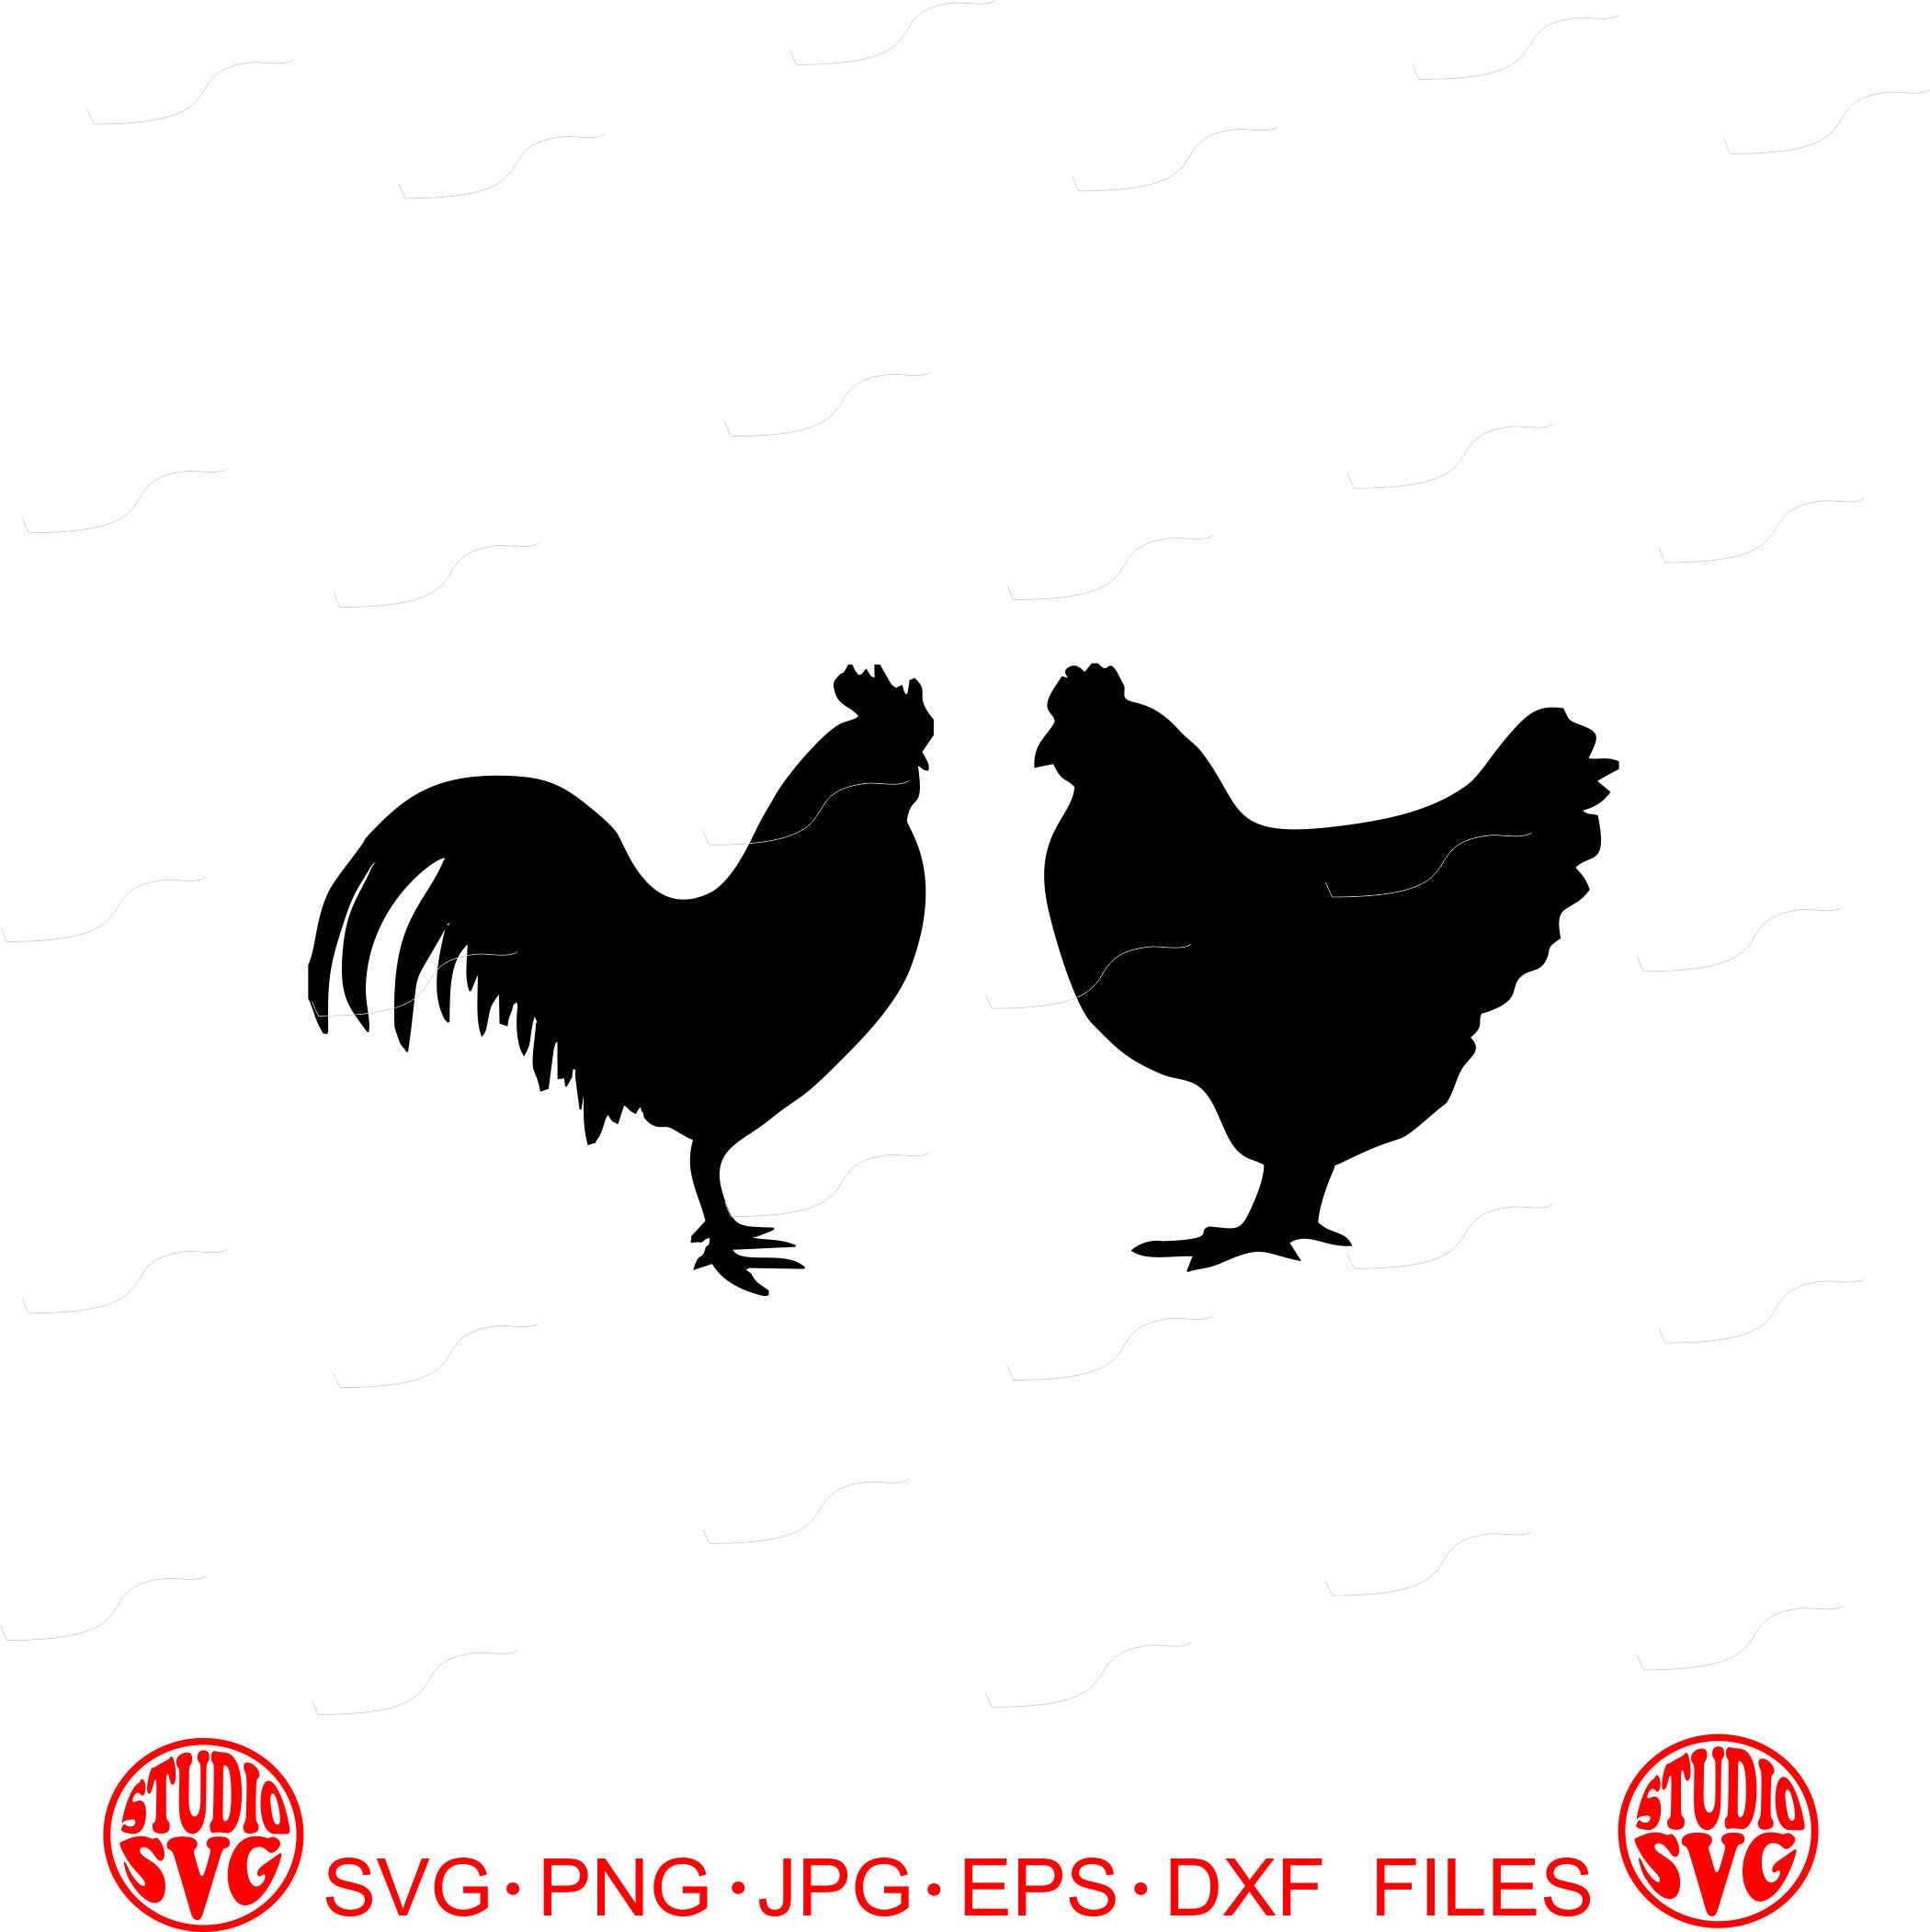 Download Rooster Svg Cut - Layered SVG Cut File - Free Fonts Online ...